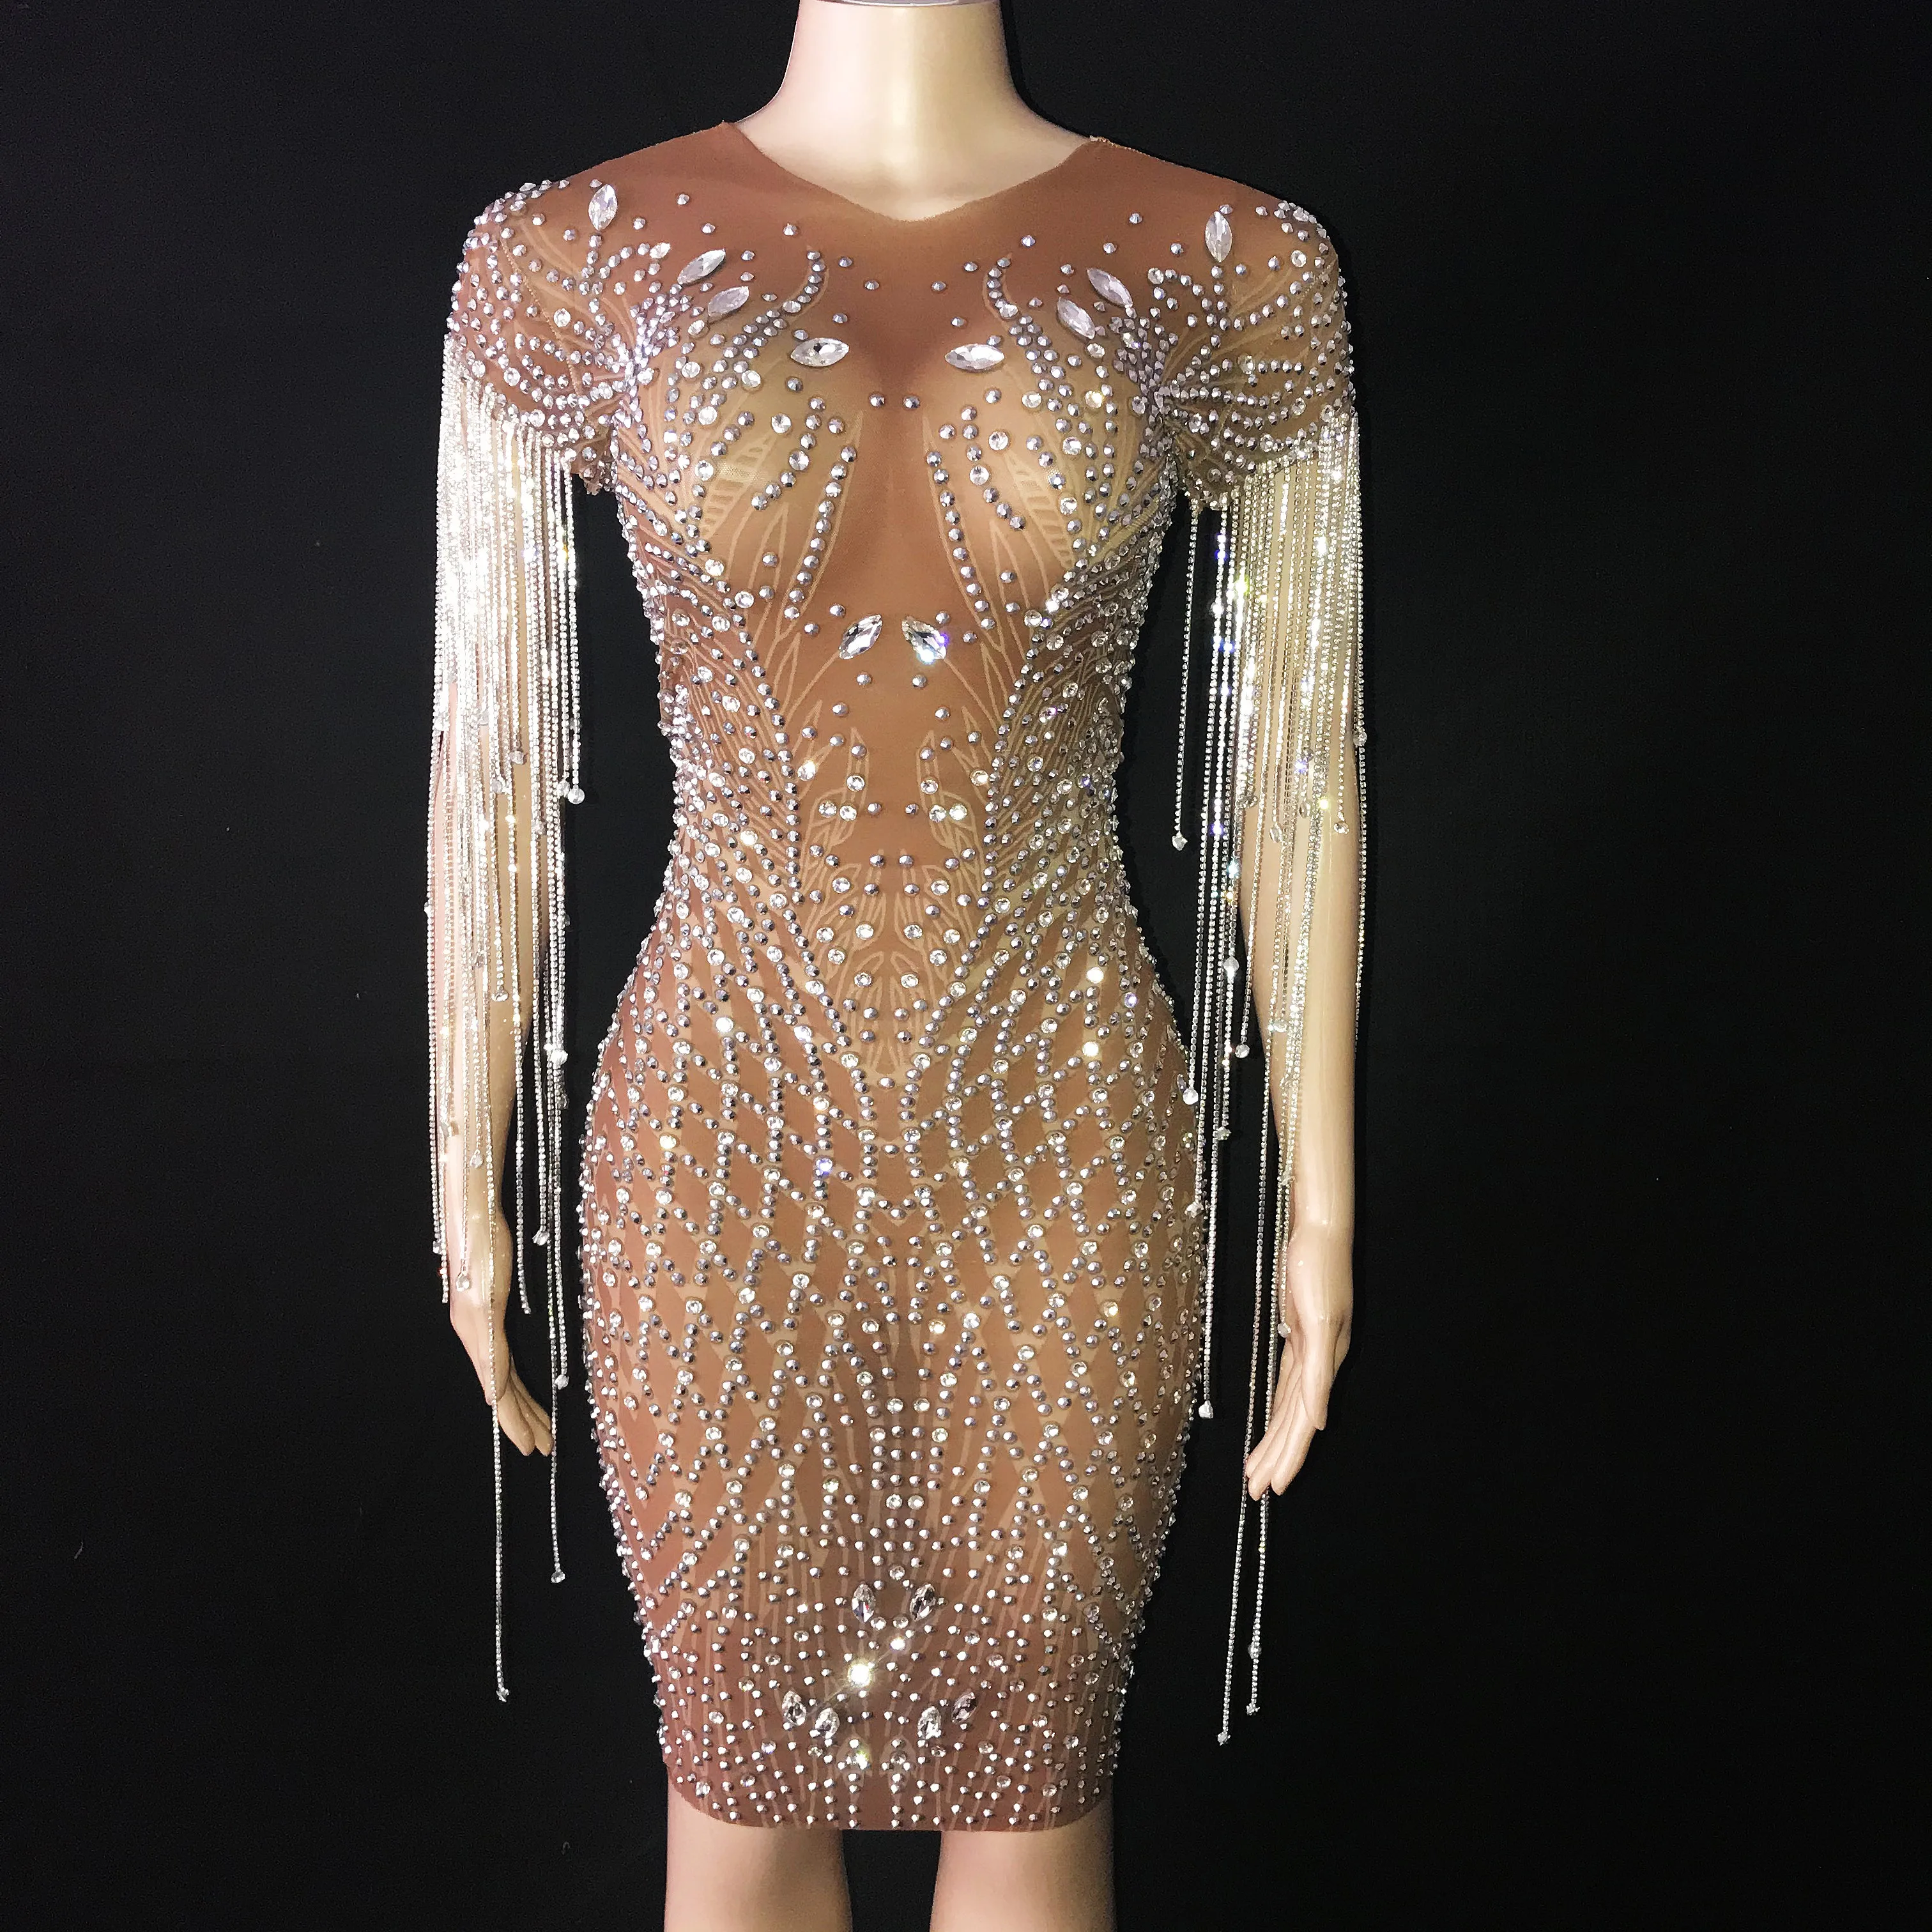 

Flashing Crystals Chains Rhinestones Dress Birthday Party Celebrate Costume Stones Fringes Outfit Singer Nightclub Dance Outfit